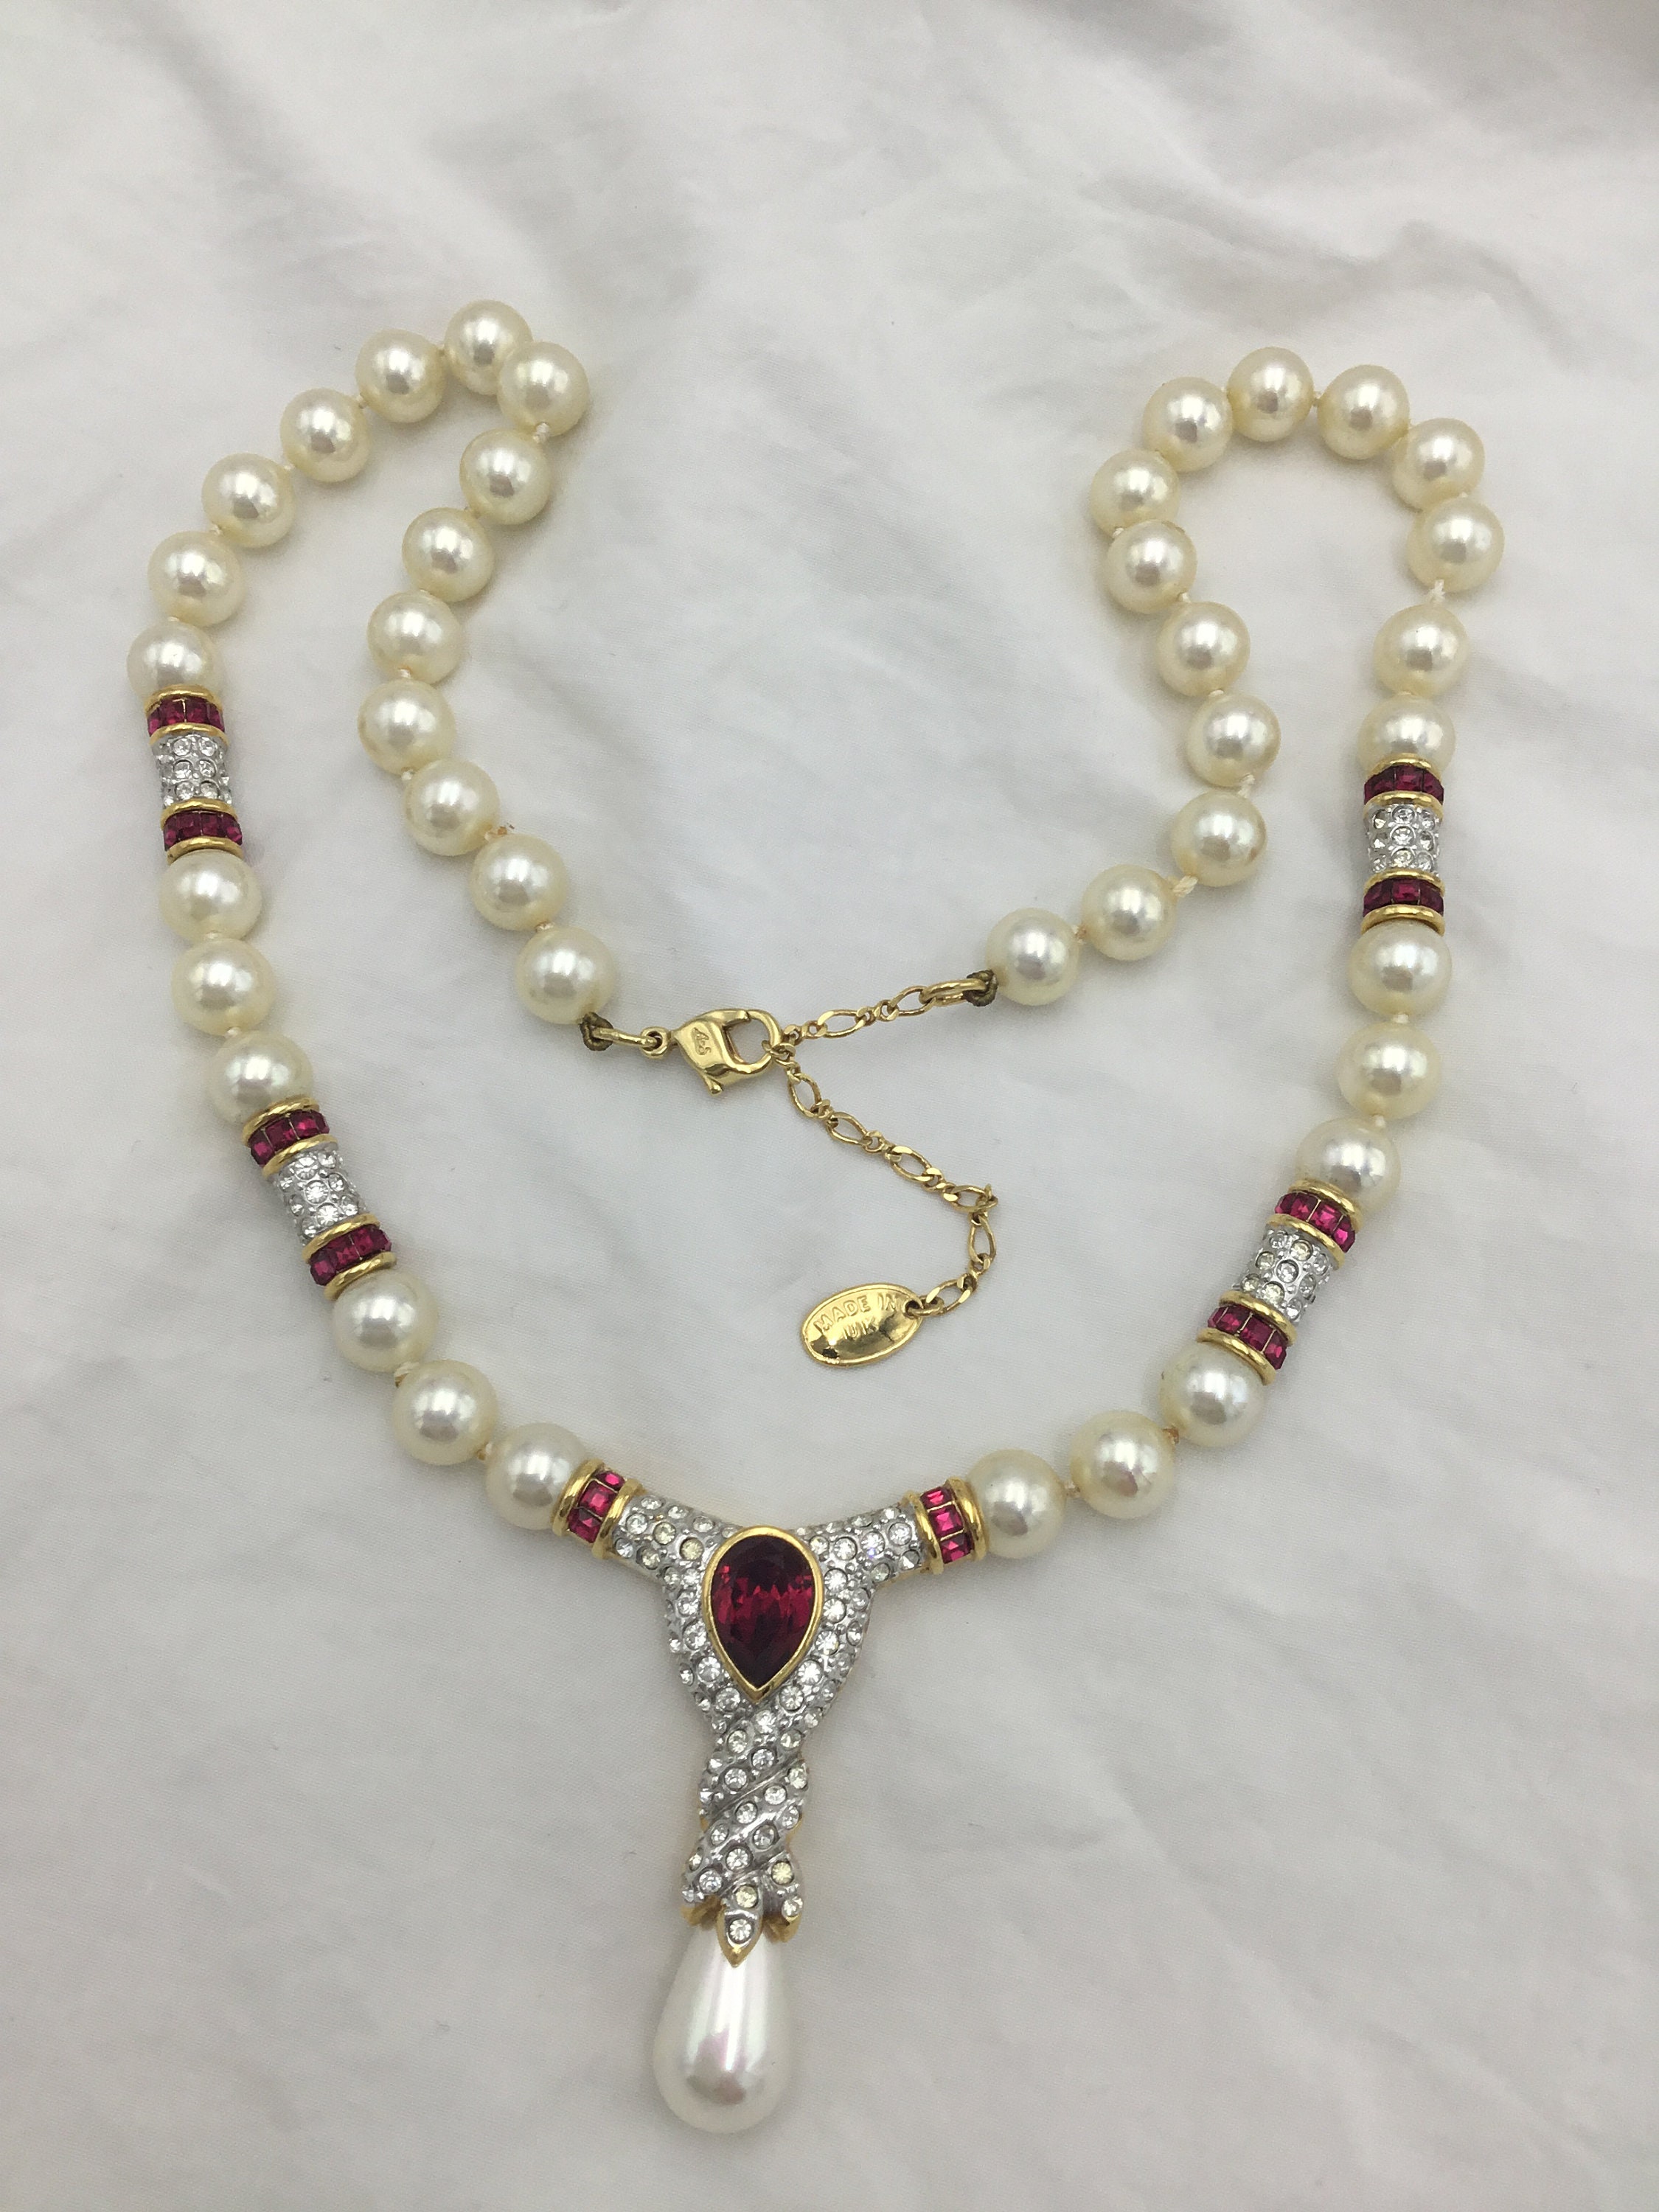 Vintage Signed Attwood &sawyer Good Quality Costume Pearl and Ruby Red  Glass Stones Drop Pendant White Rhinestone Gold Tone Bead Necklace. 